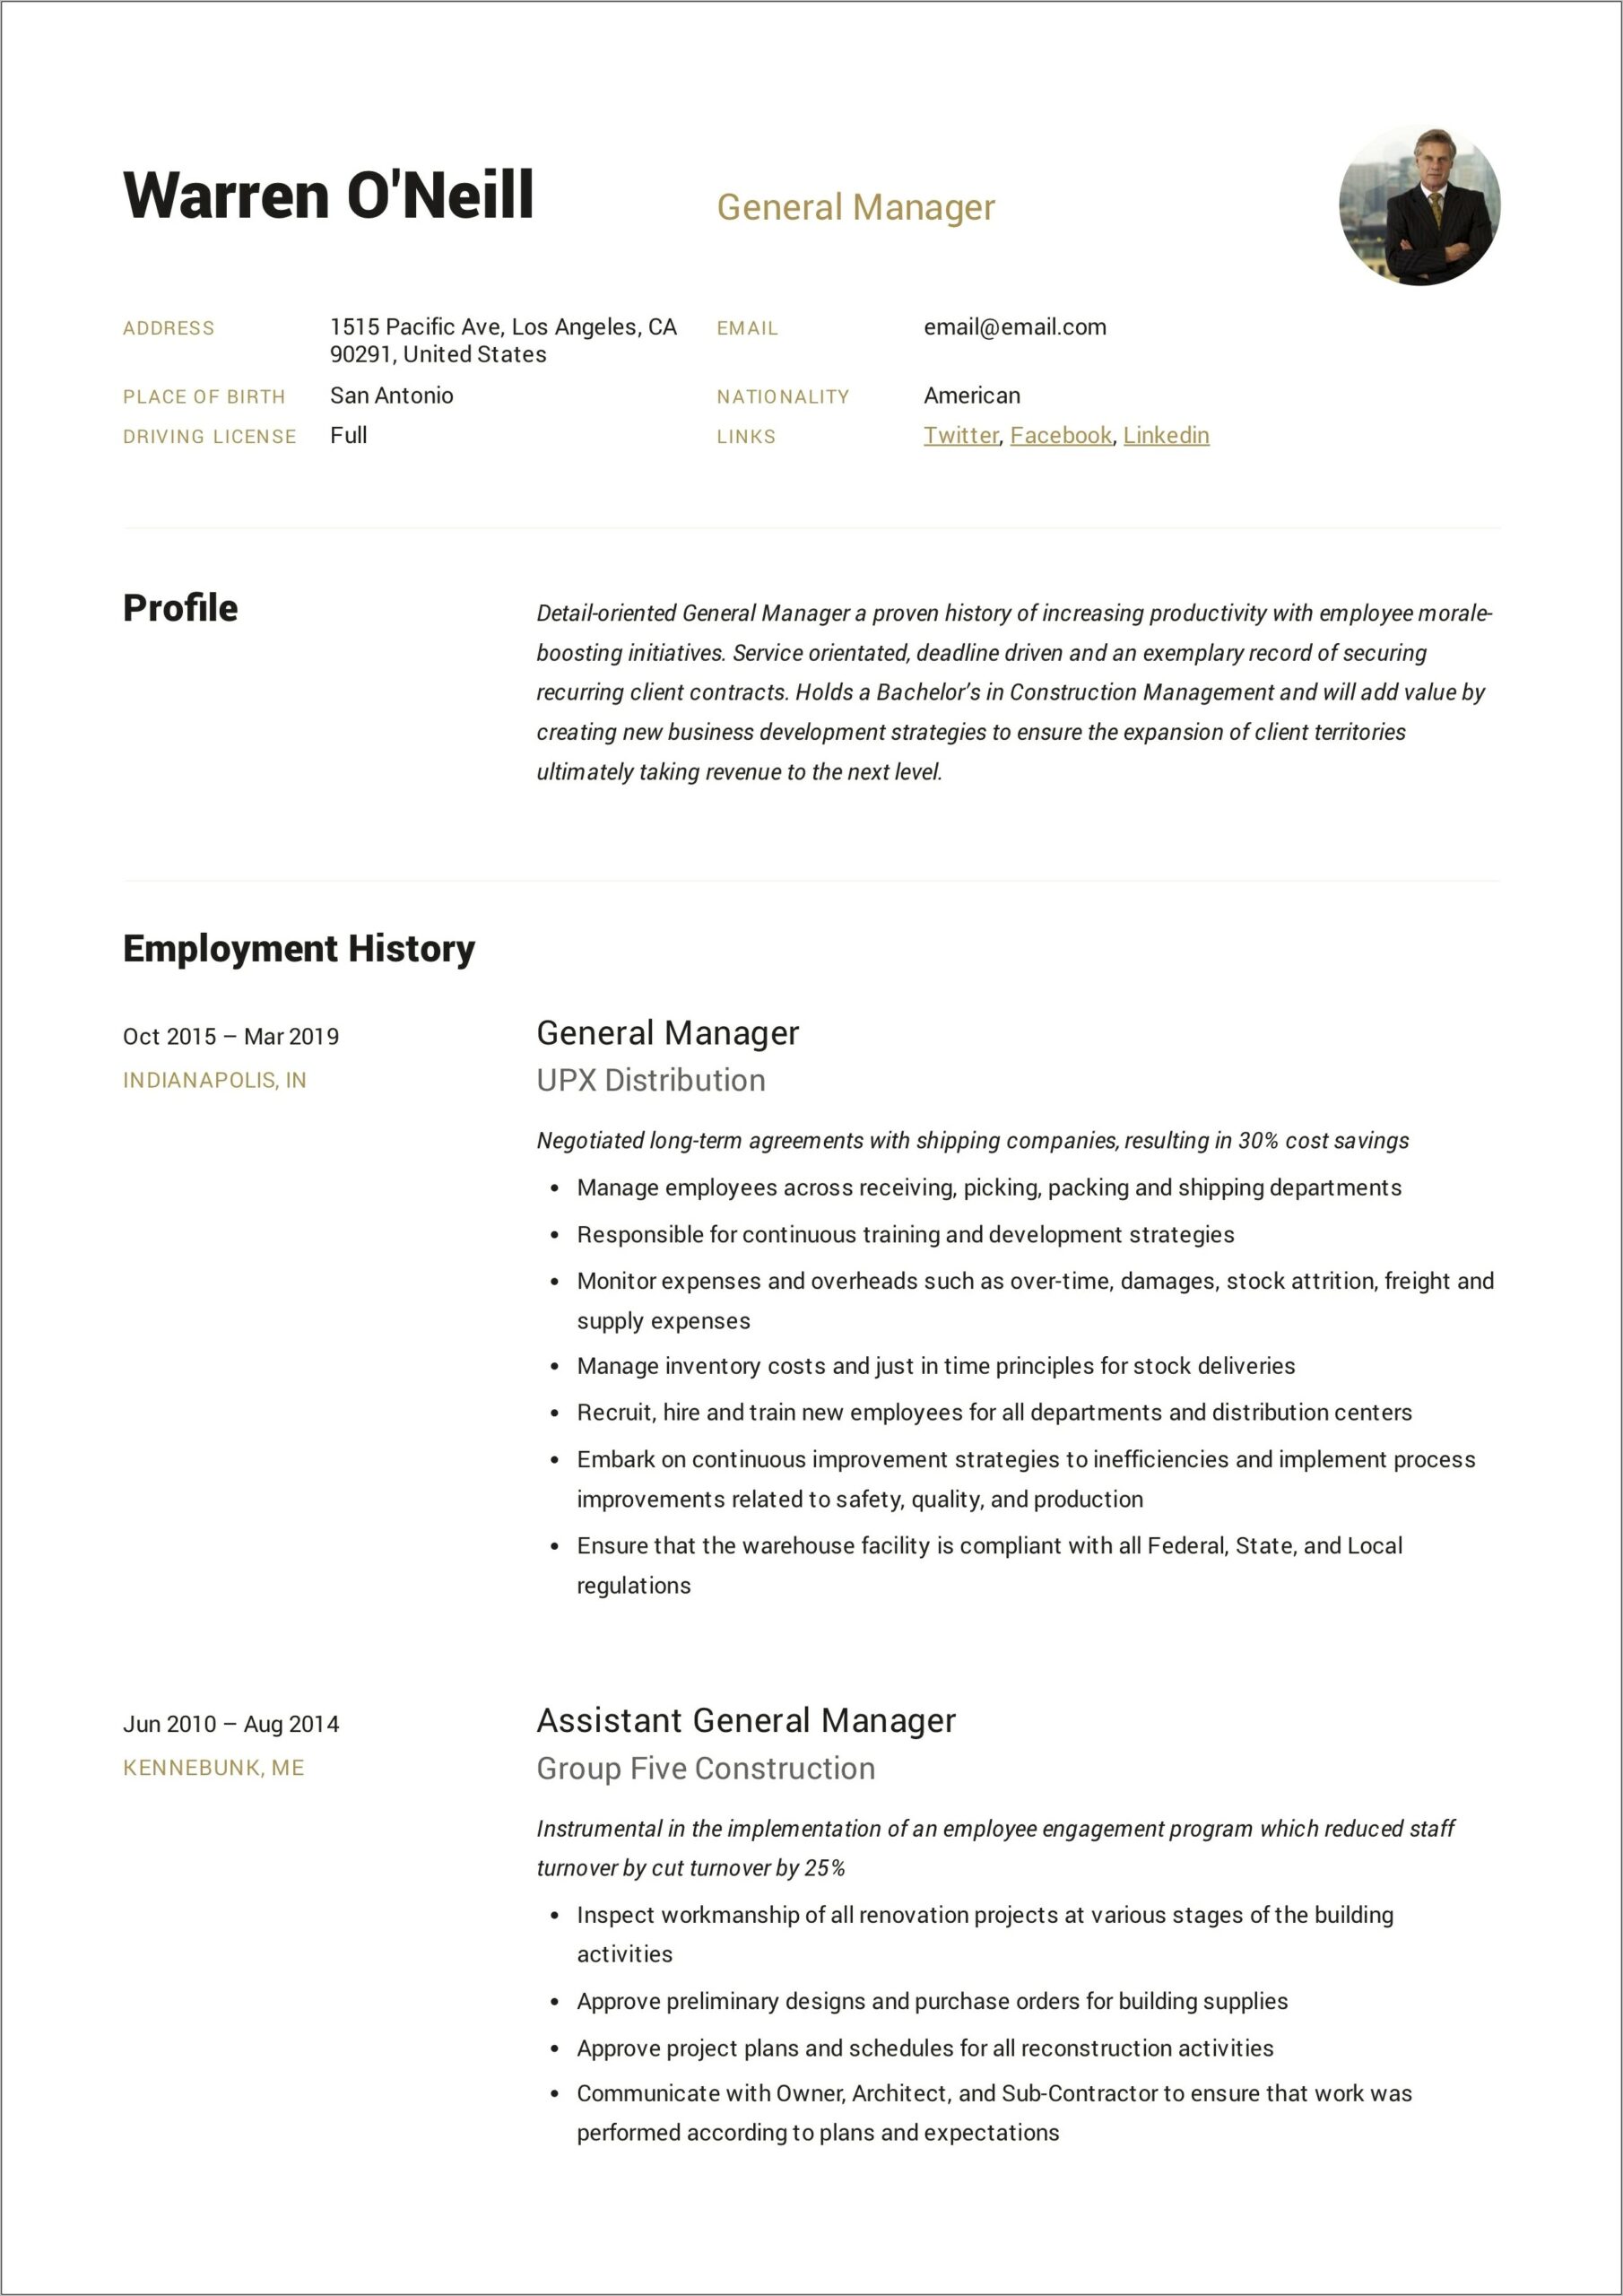 Free Hotel General Manager Resume Examples